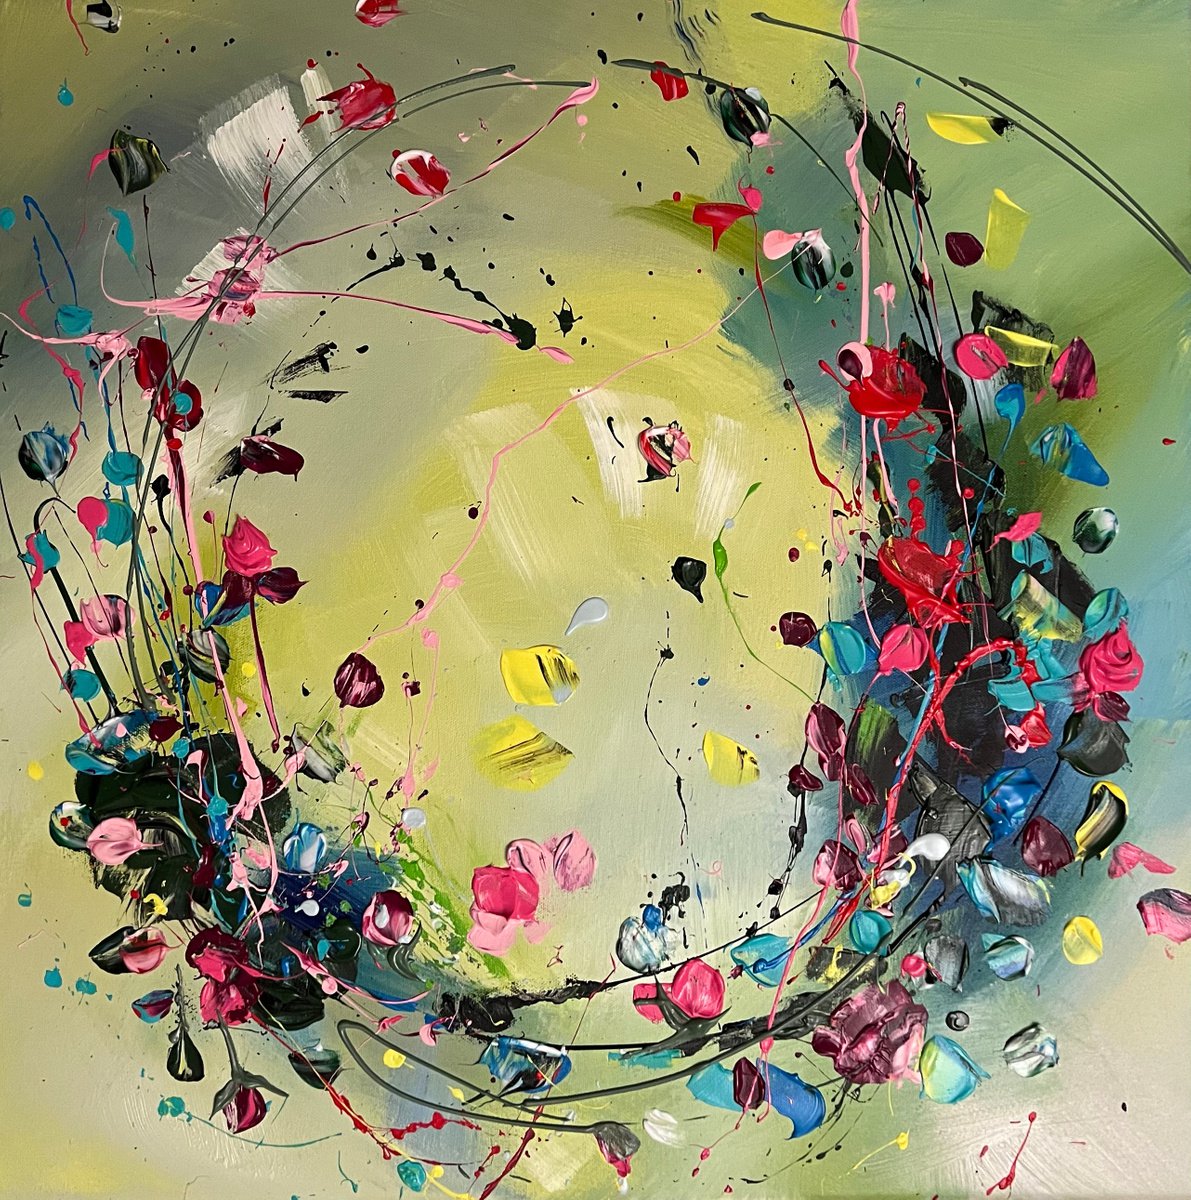 Square acrylic structure painting with flowers Lucky Horseshoe 60x60x2cm, mixed media by Anastassia Skopp